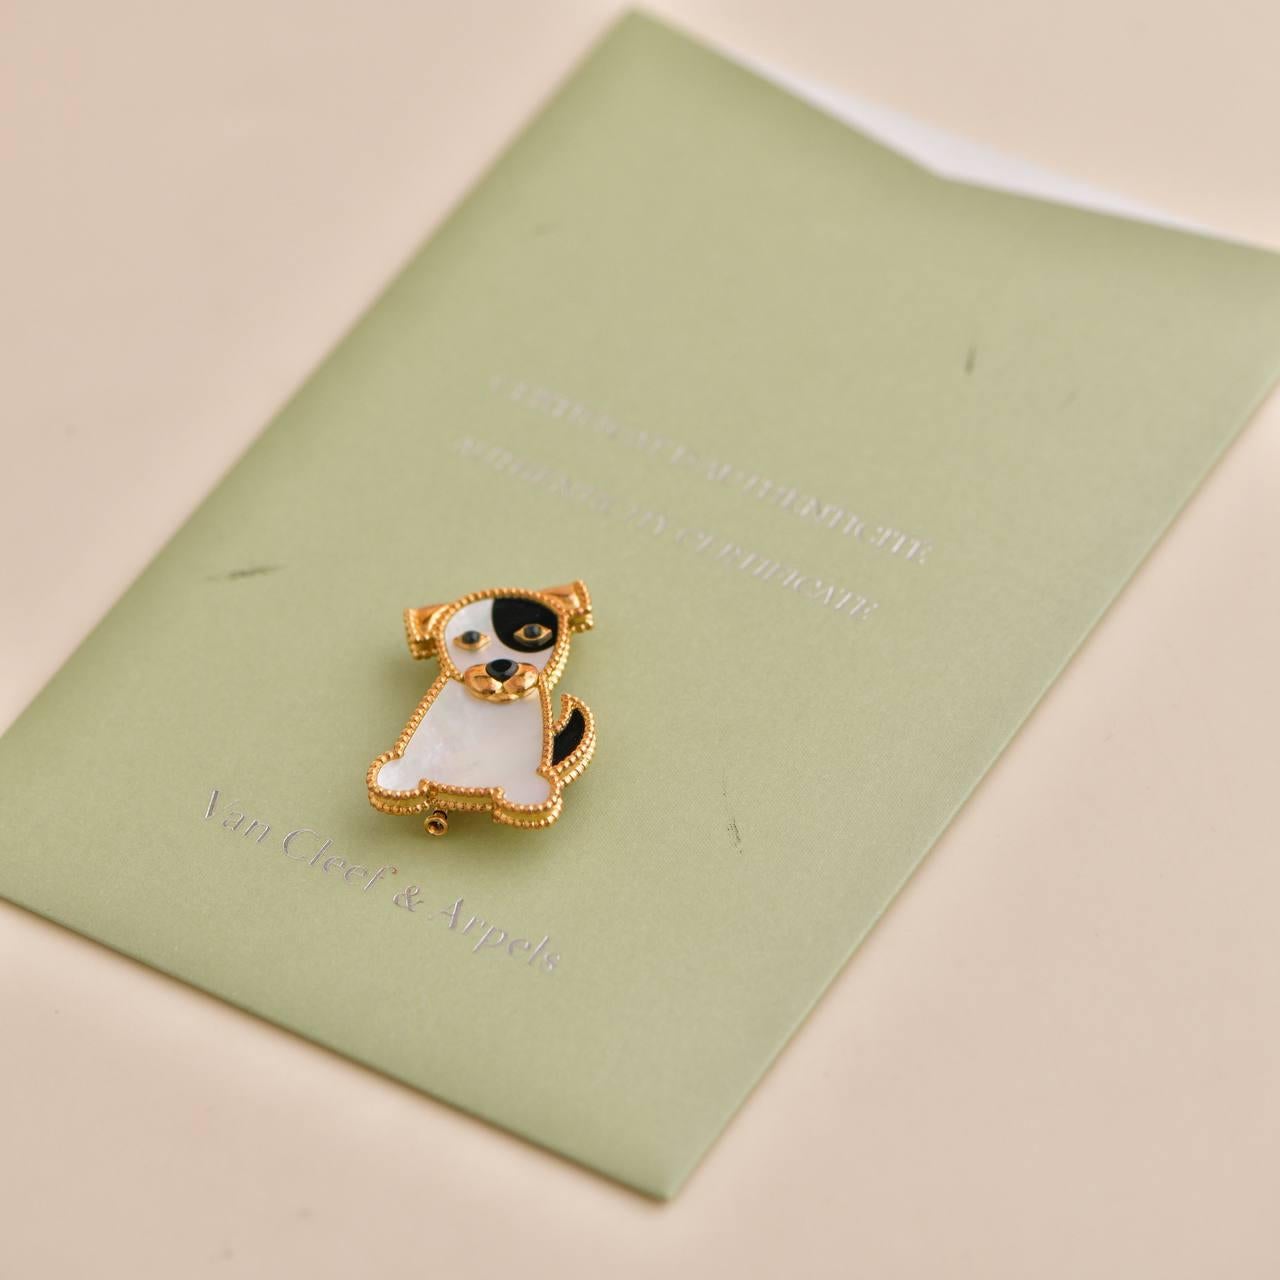 Uncut Van Cleef & Arpels 18K Yellow Gold Mother-of-Pearl Onyx Lucky Animals Dog Brooch